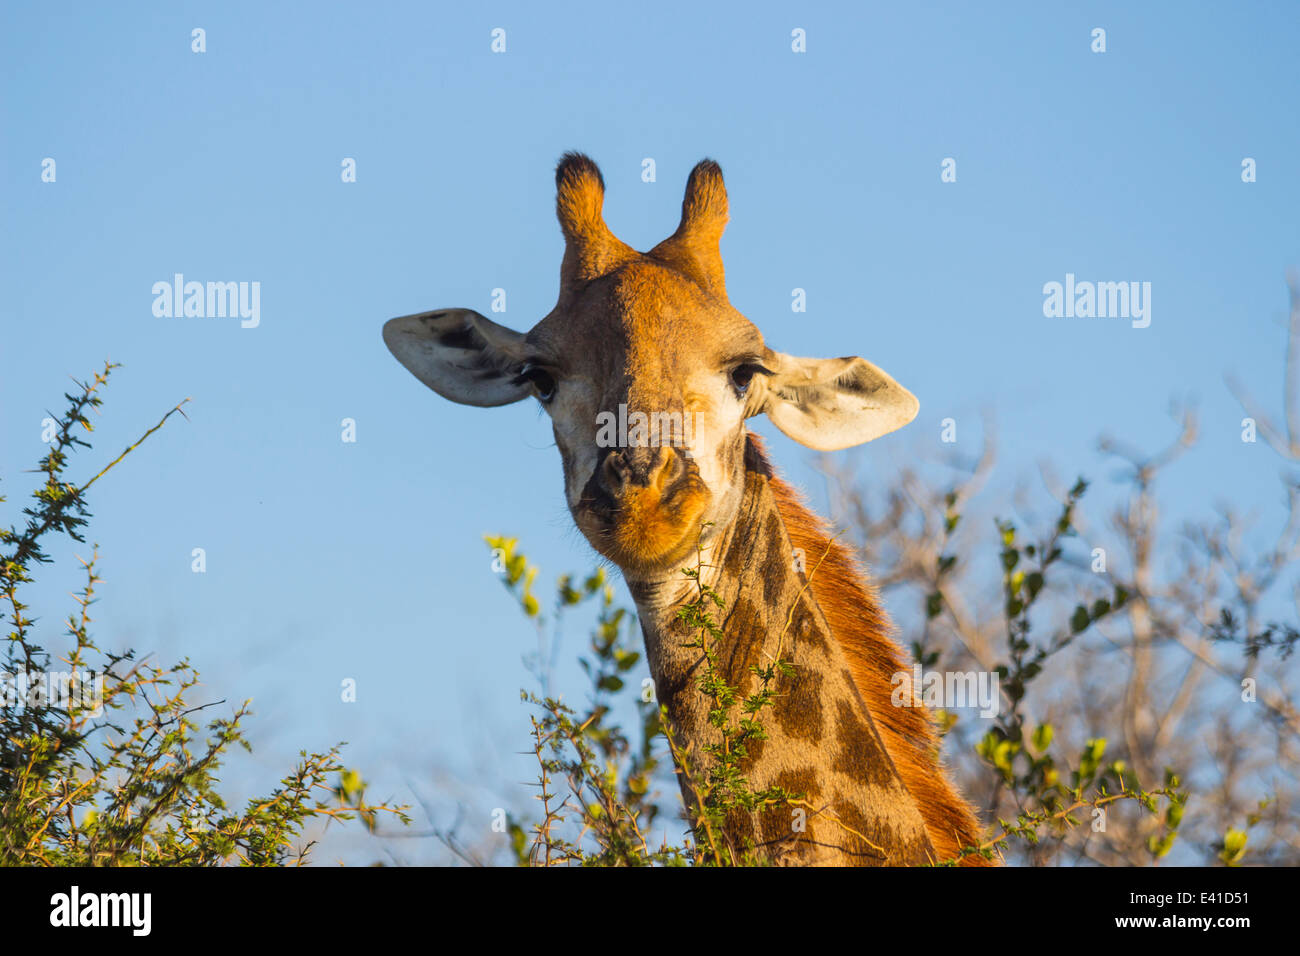 Giraffe eating at the tops of trees Stock Photo